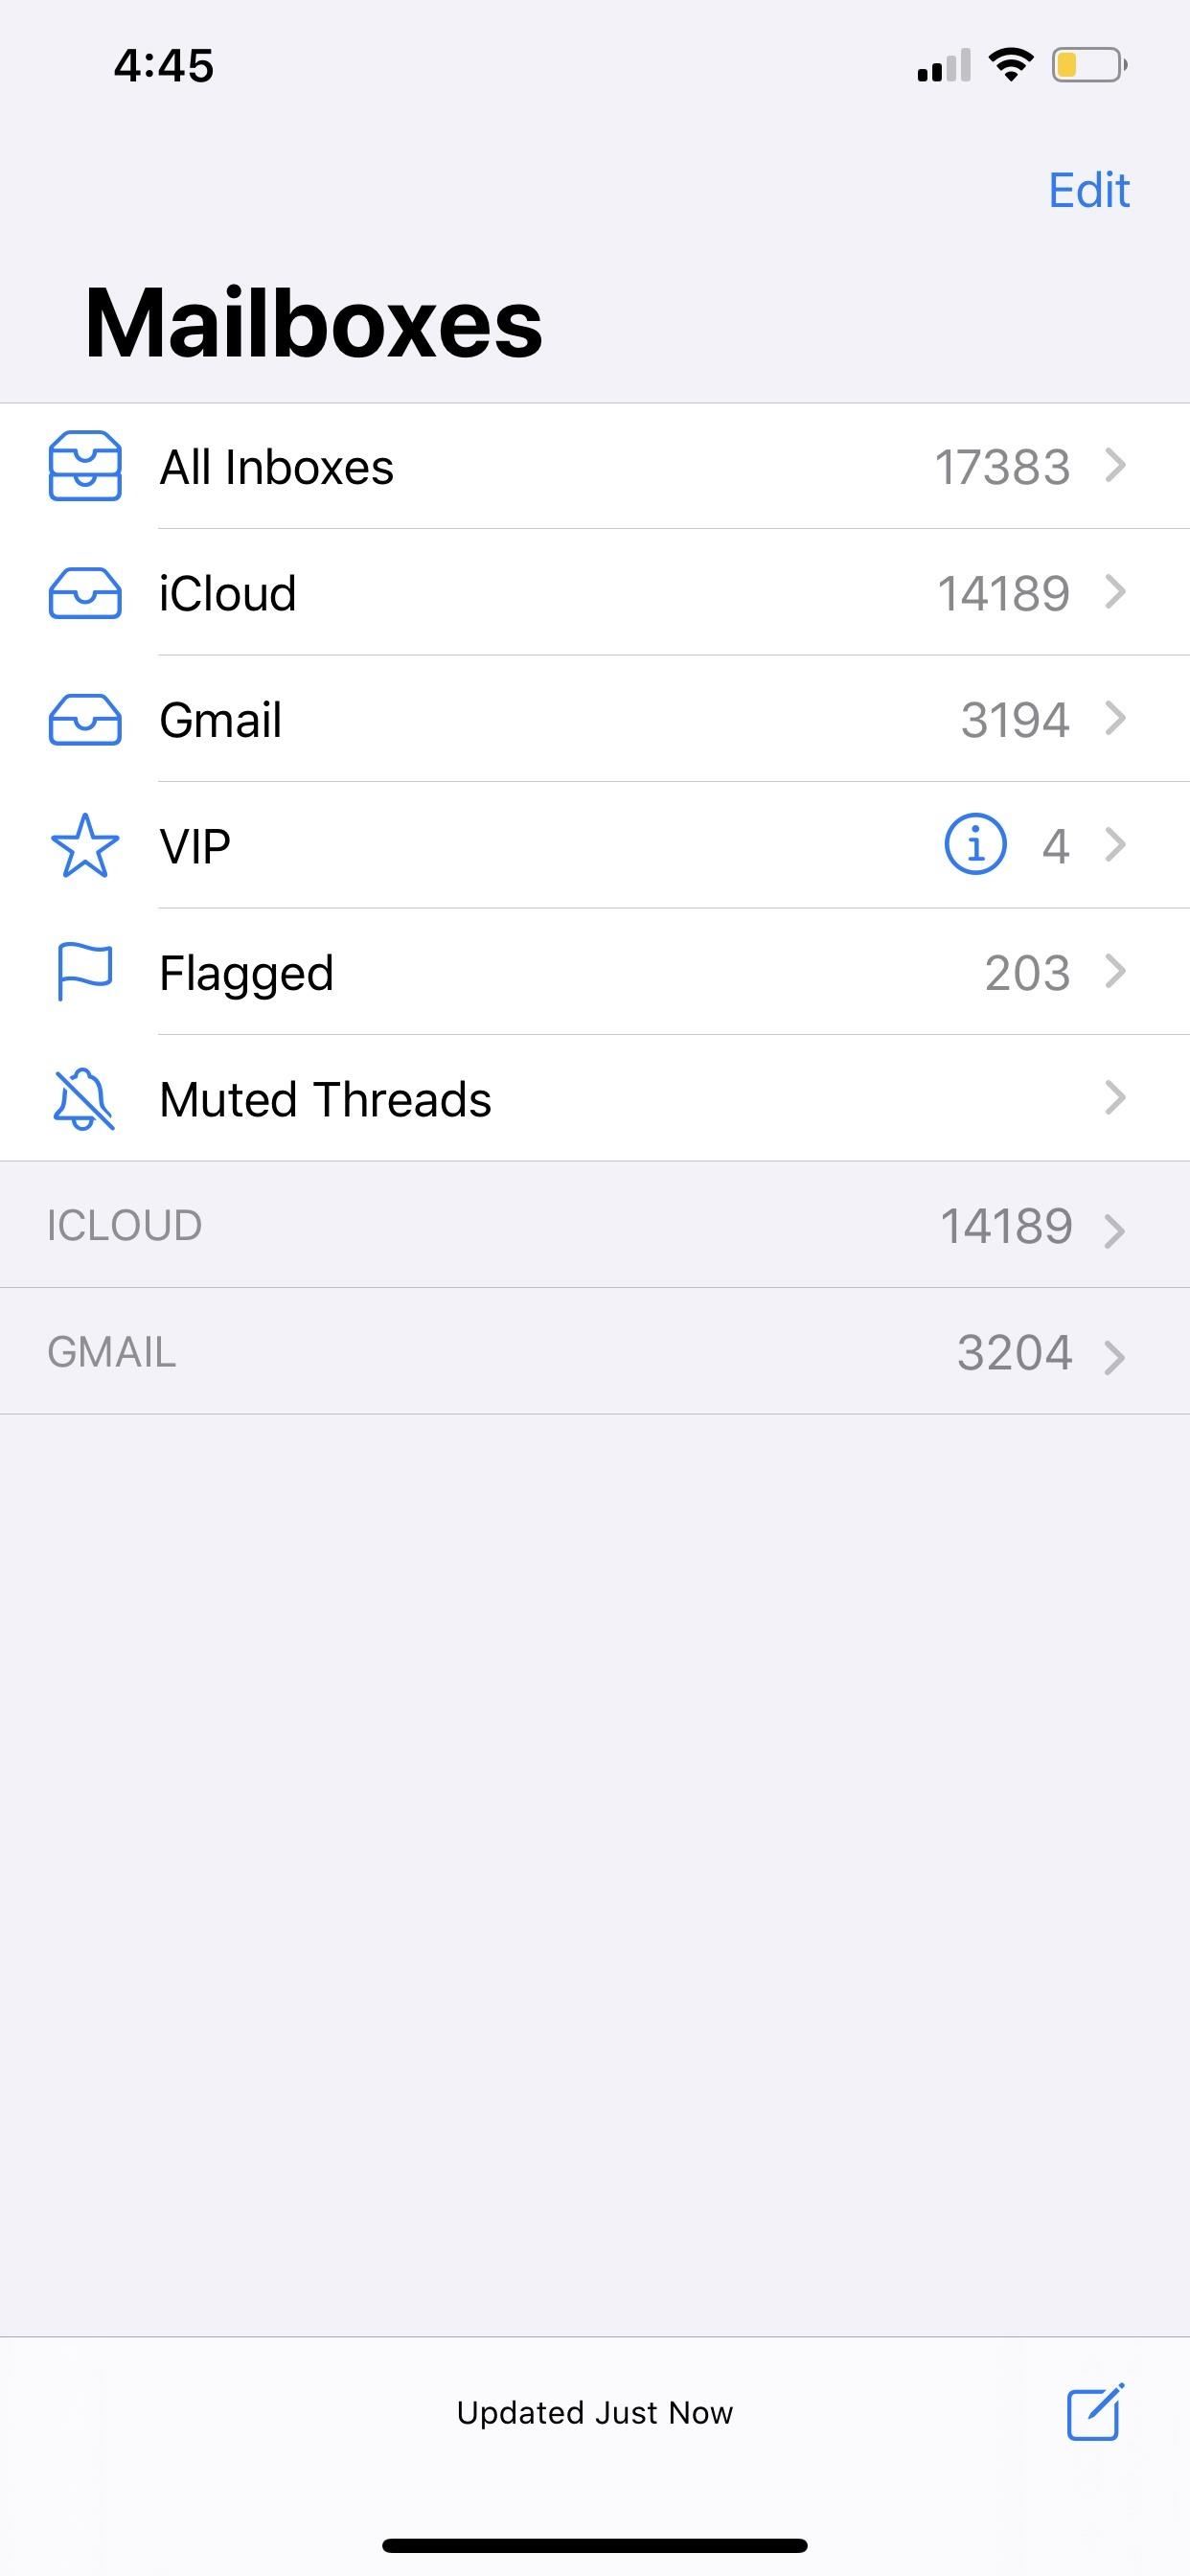 How to Mute Email Conversation Threads in iOS 13's Mail App to Stop Annoying Notifications